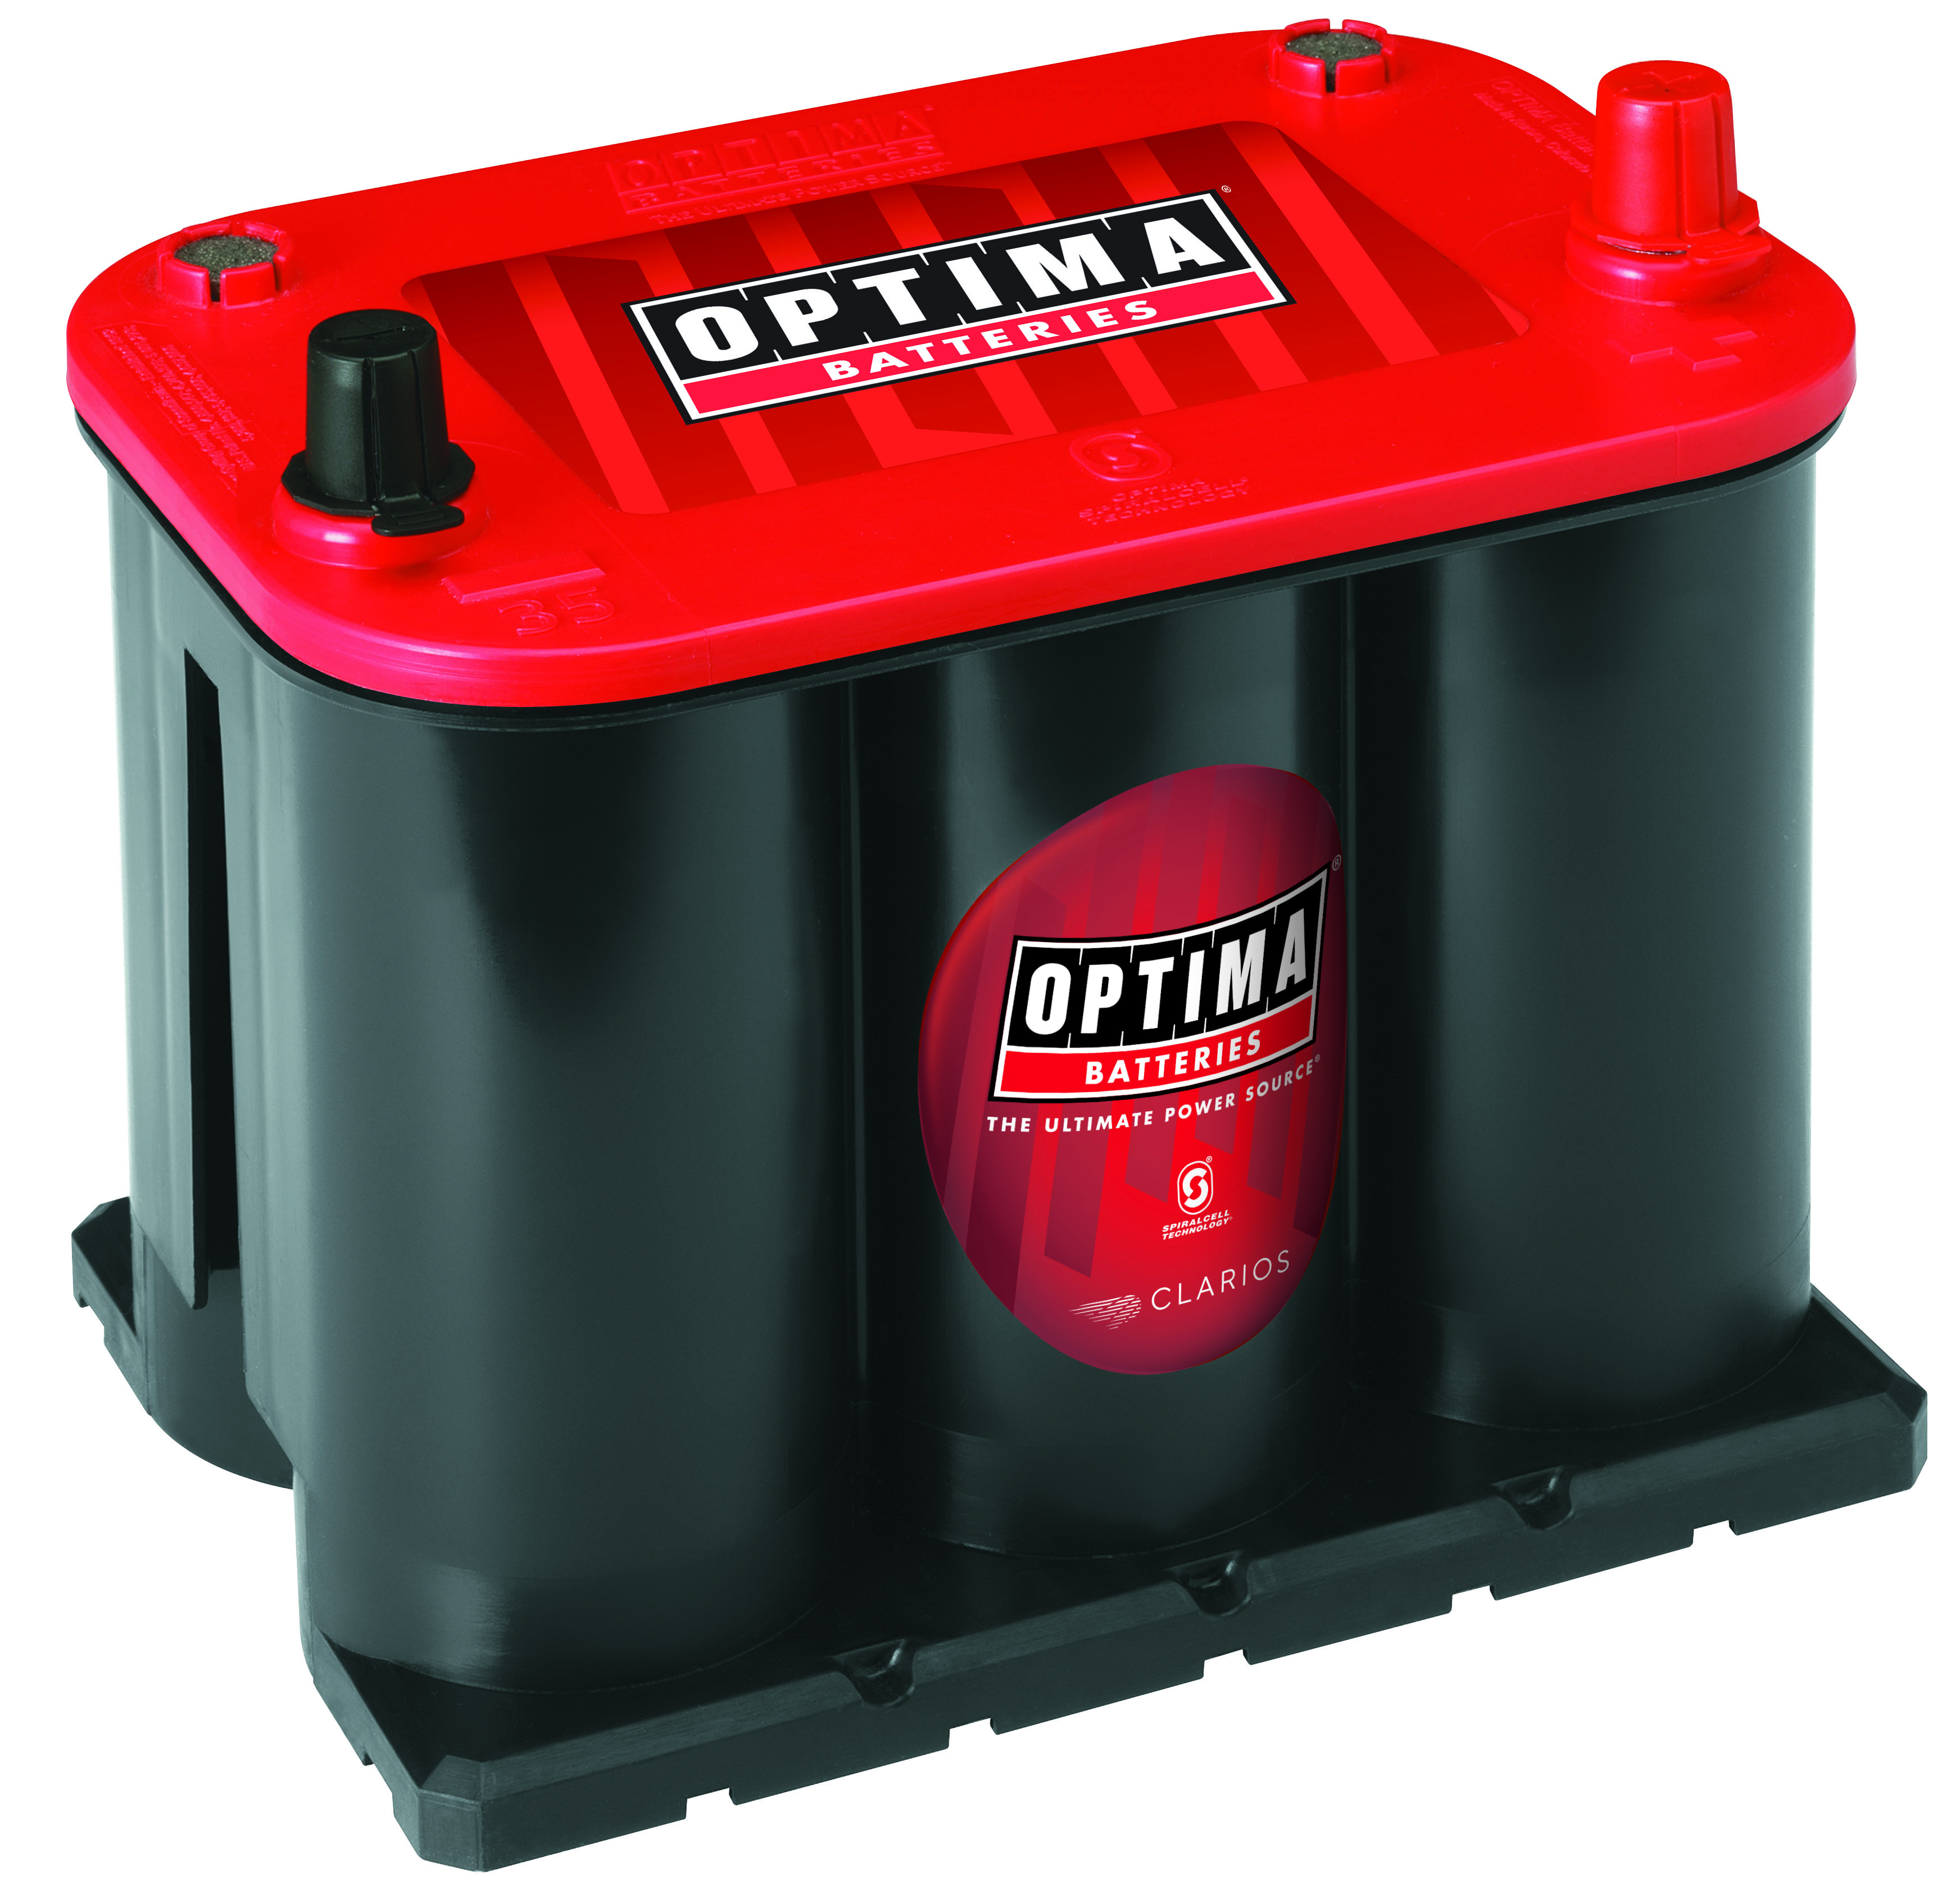 OPTIMA RedTop AGM Spiralcell Automotive Starting Battery, Group Size 35, 12 Volt 720 CCA - image 1 of 5